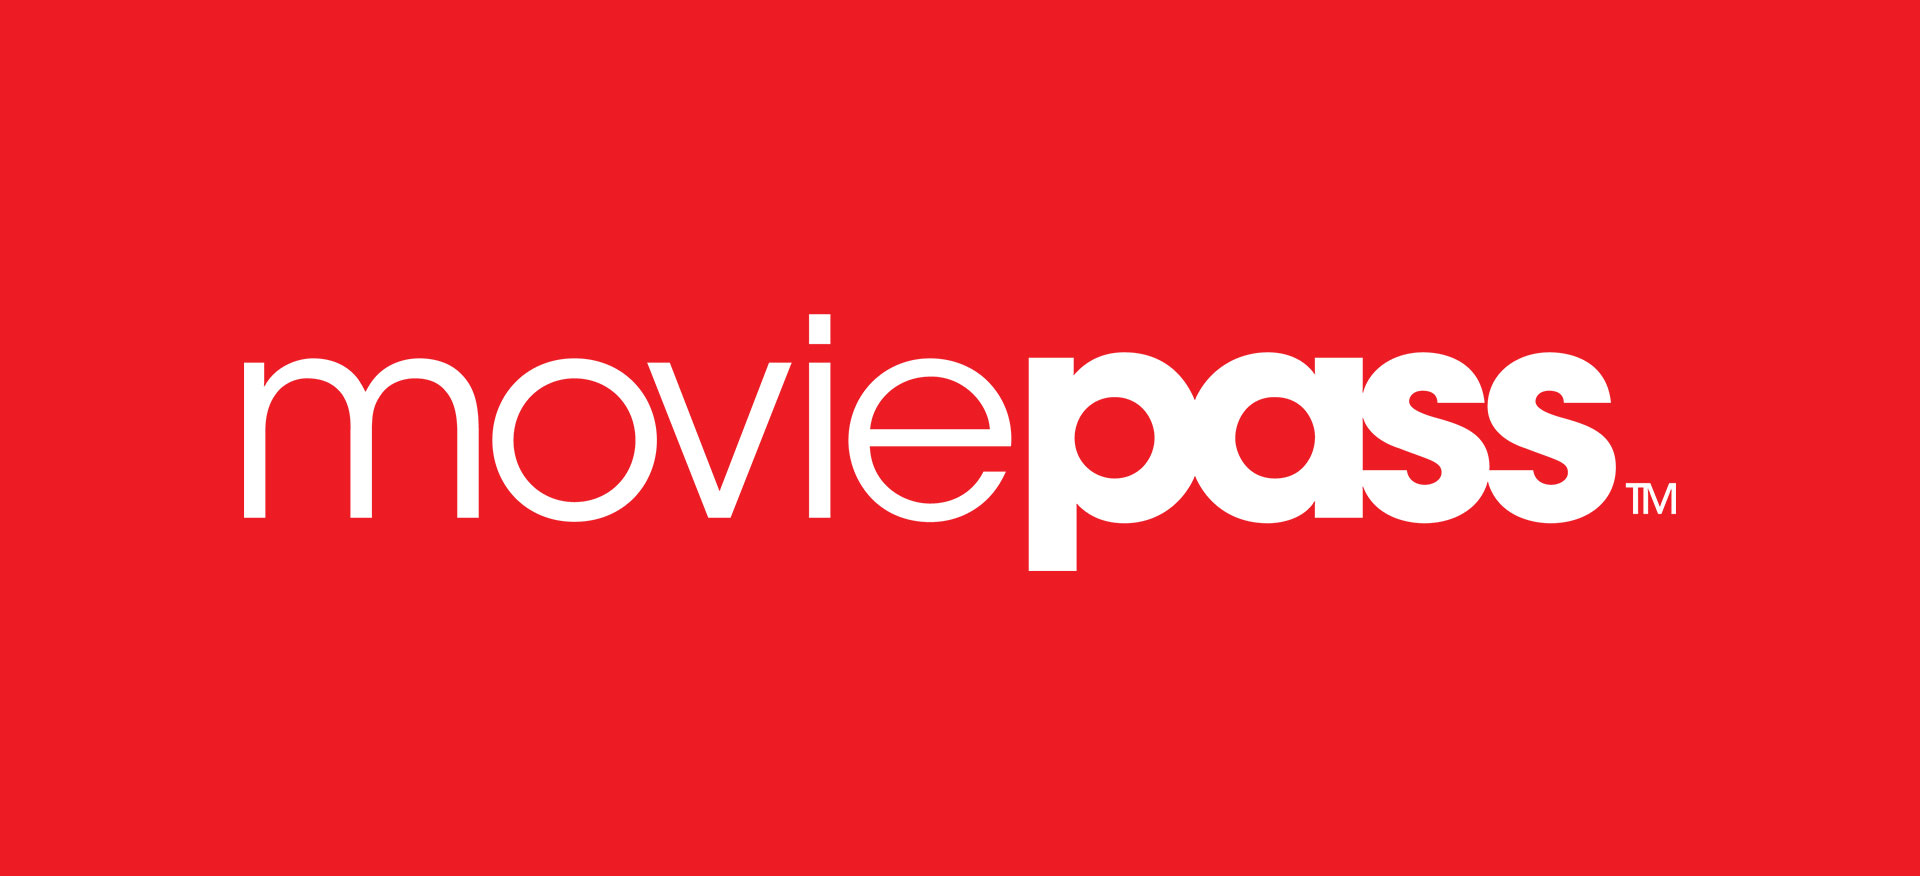 How to use a movie pass for beginners?